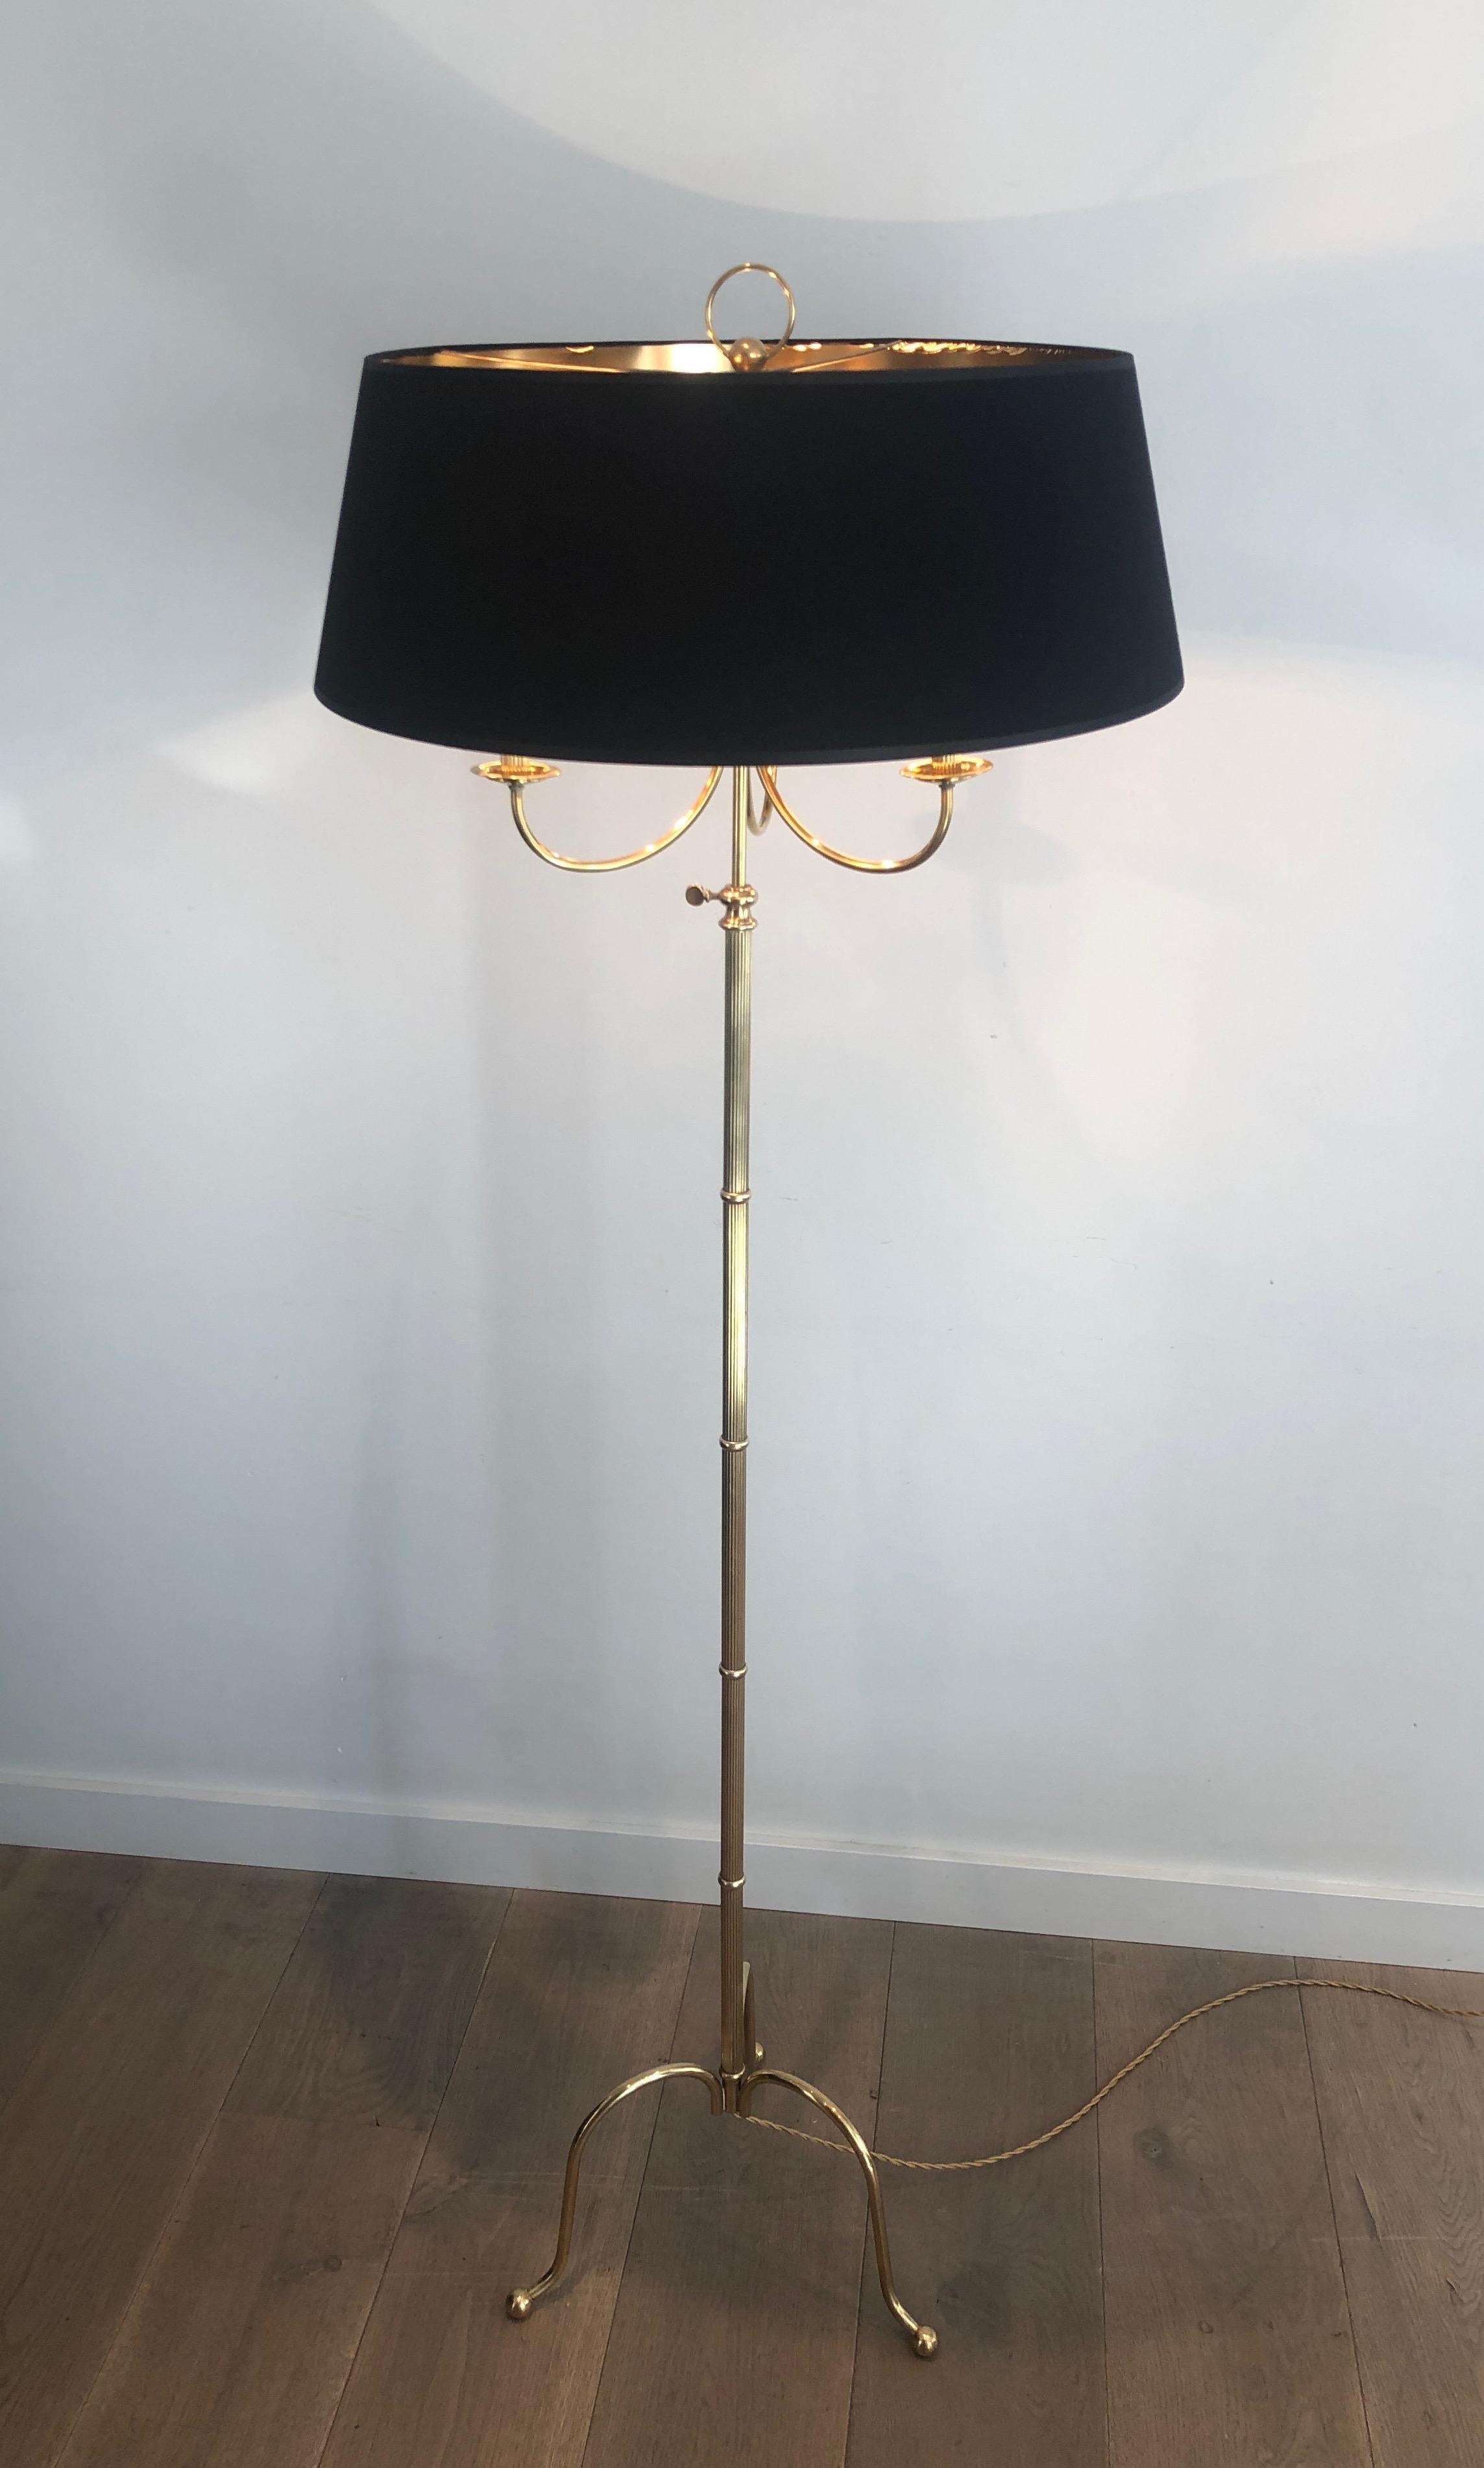 Neoclassical Tripode Brass Floor Lamp with 3 Arms, French Work by Maison Jansen For Sale